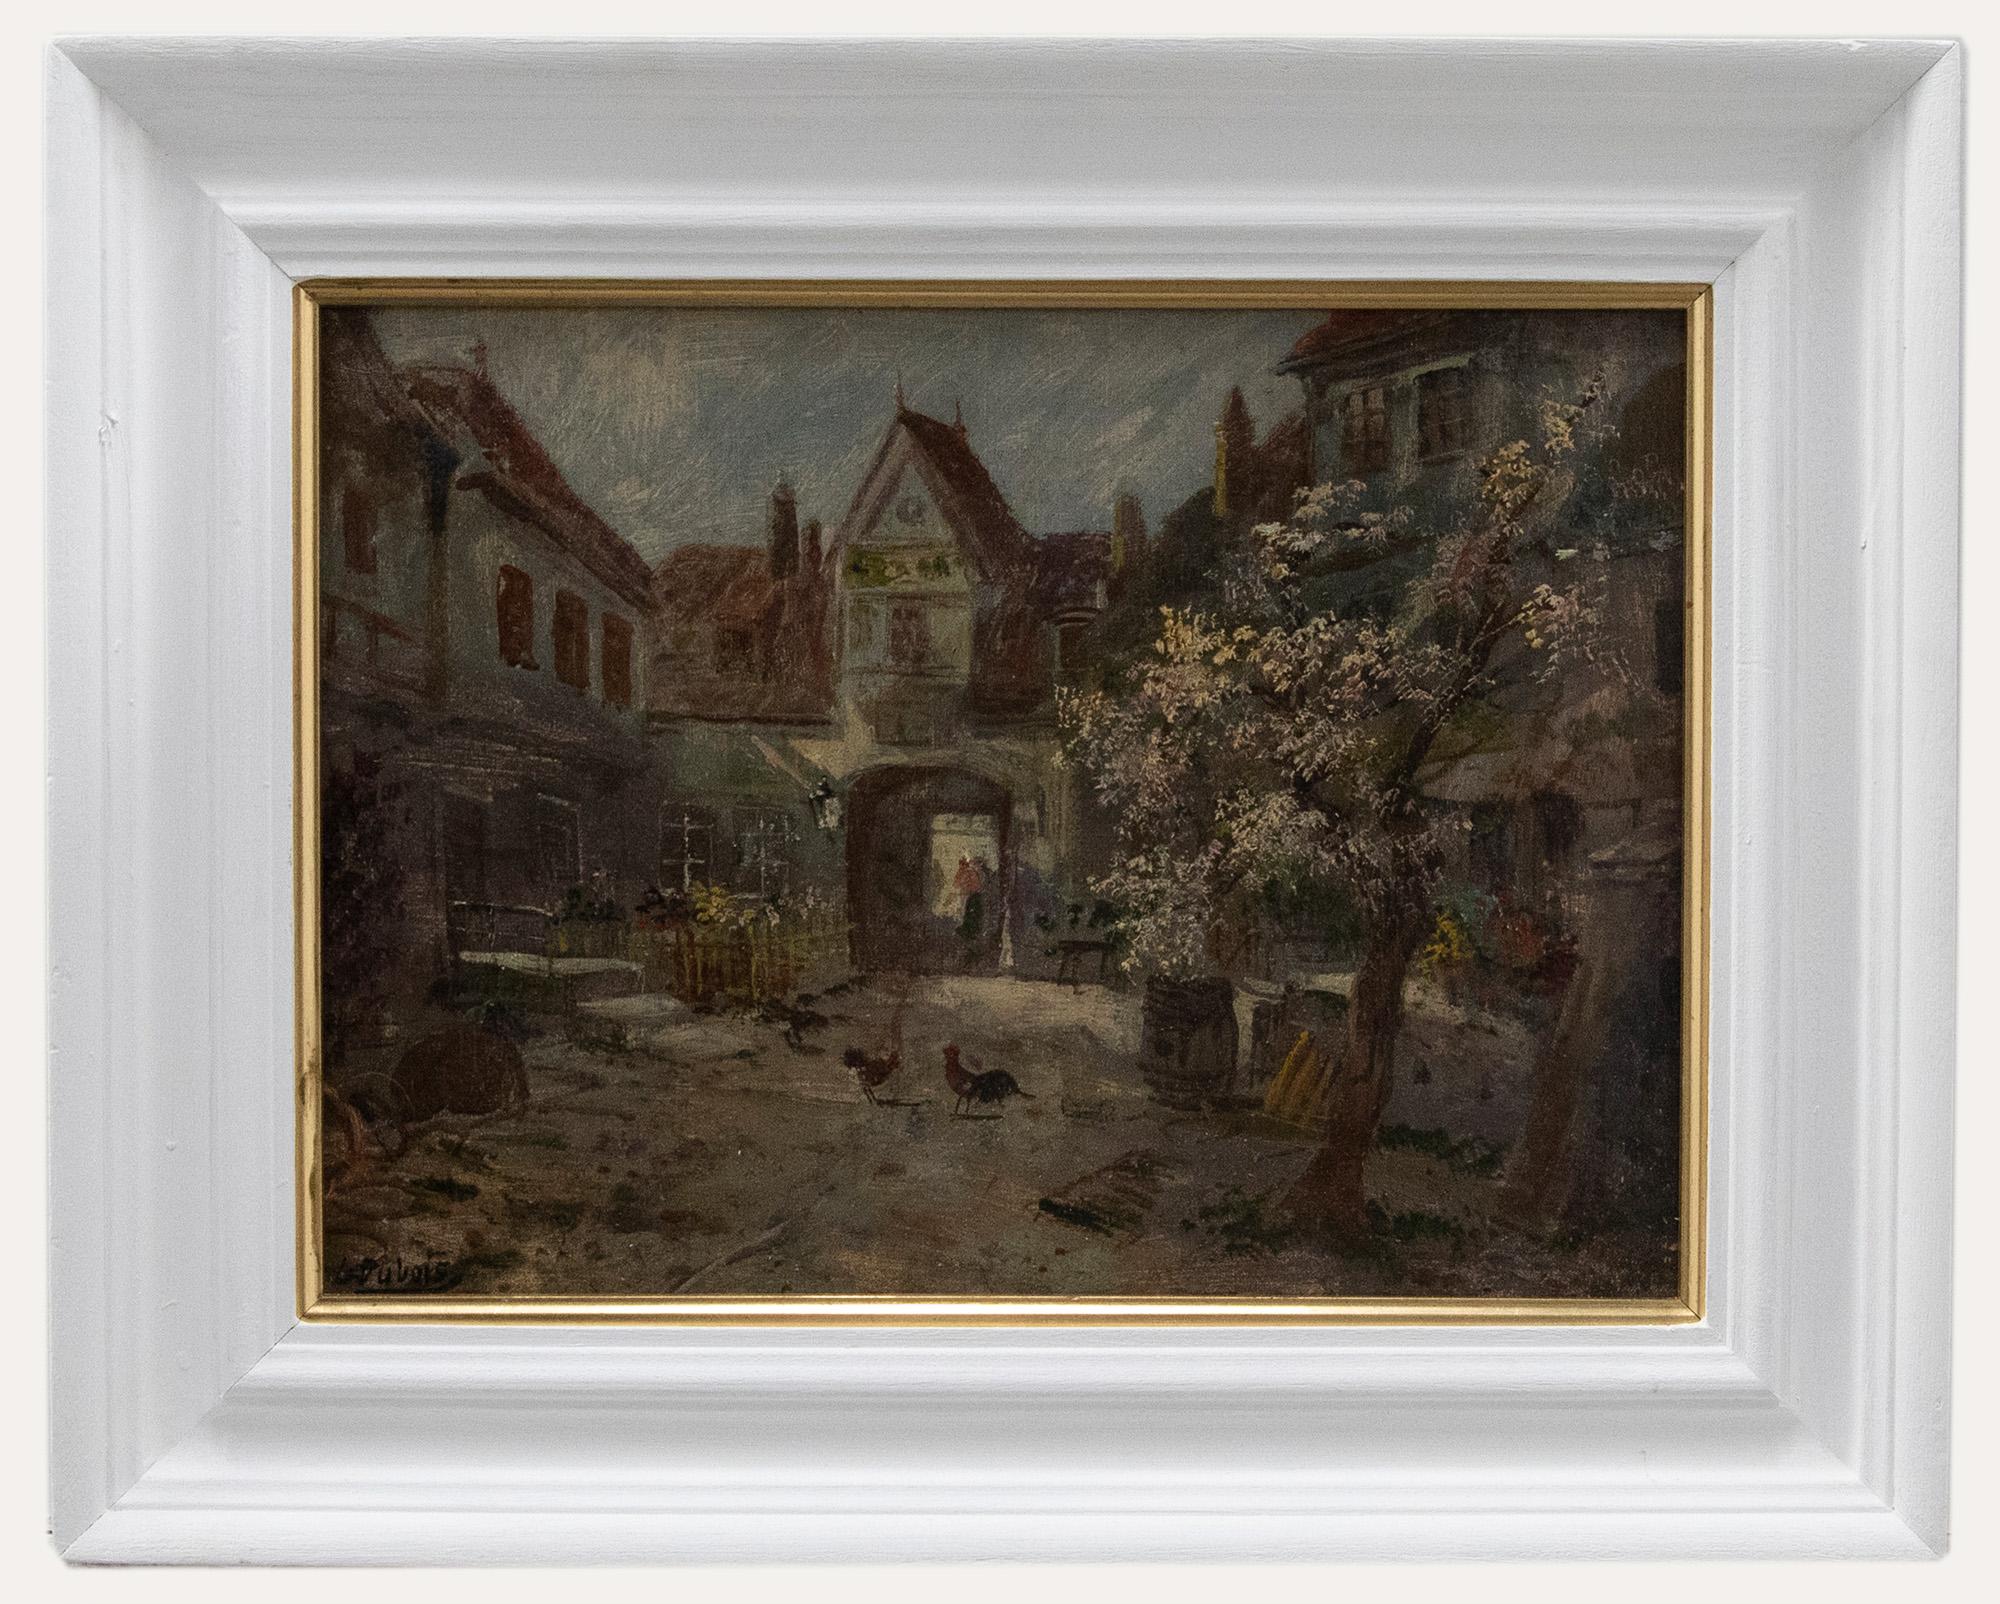 Unknown Landscape Painting - G. Dubois - Framed Early 20th Century Oil, Town Scene with Chickens